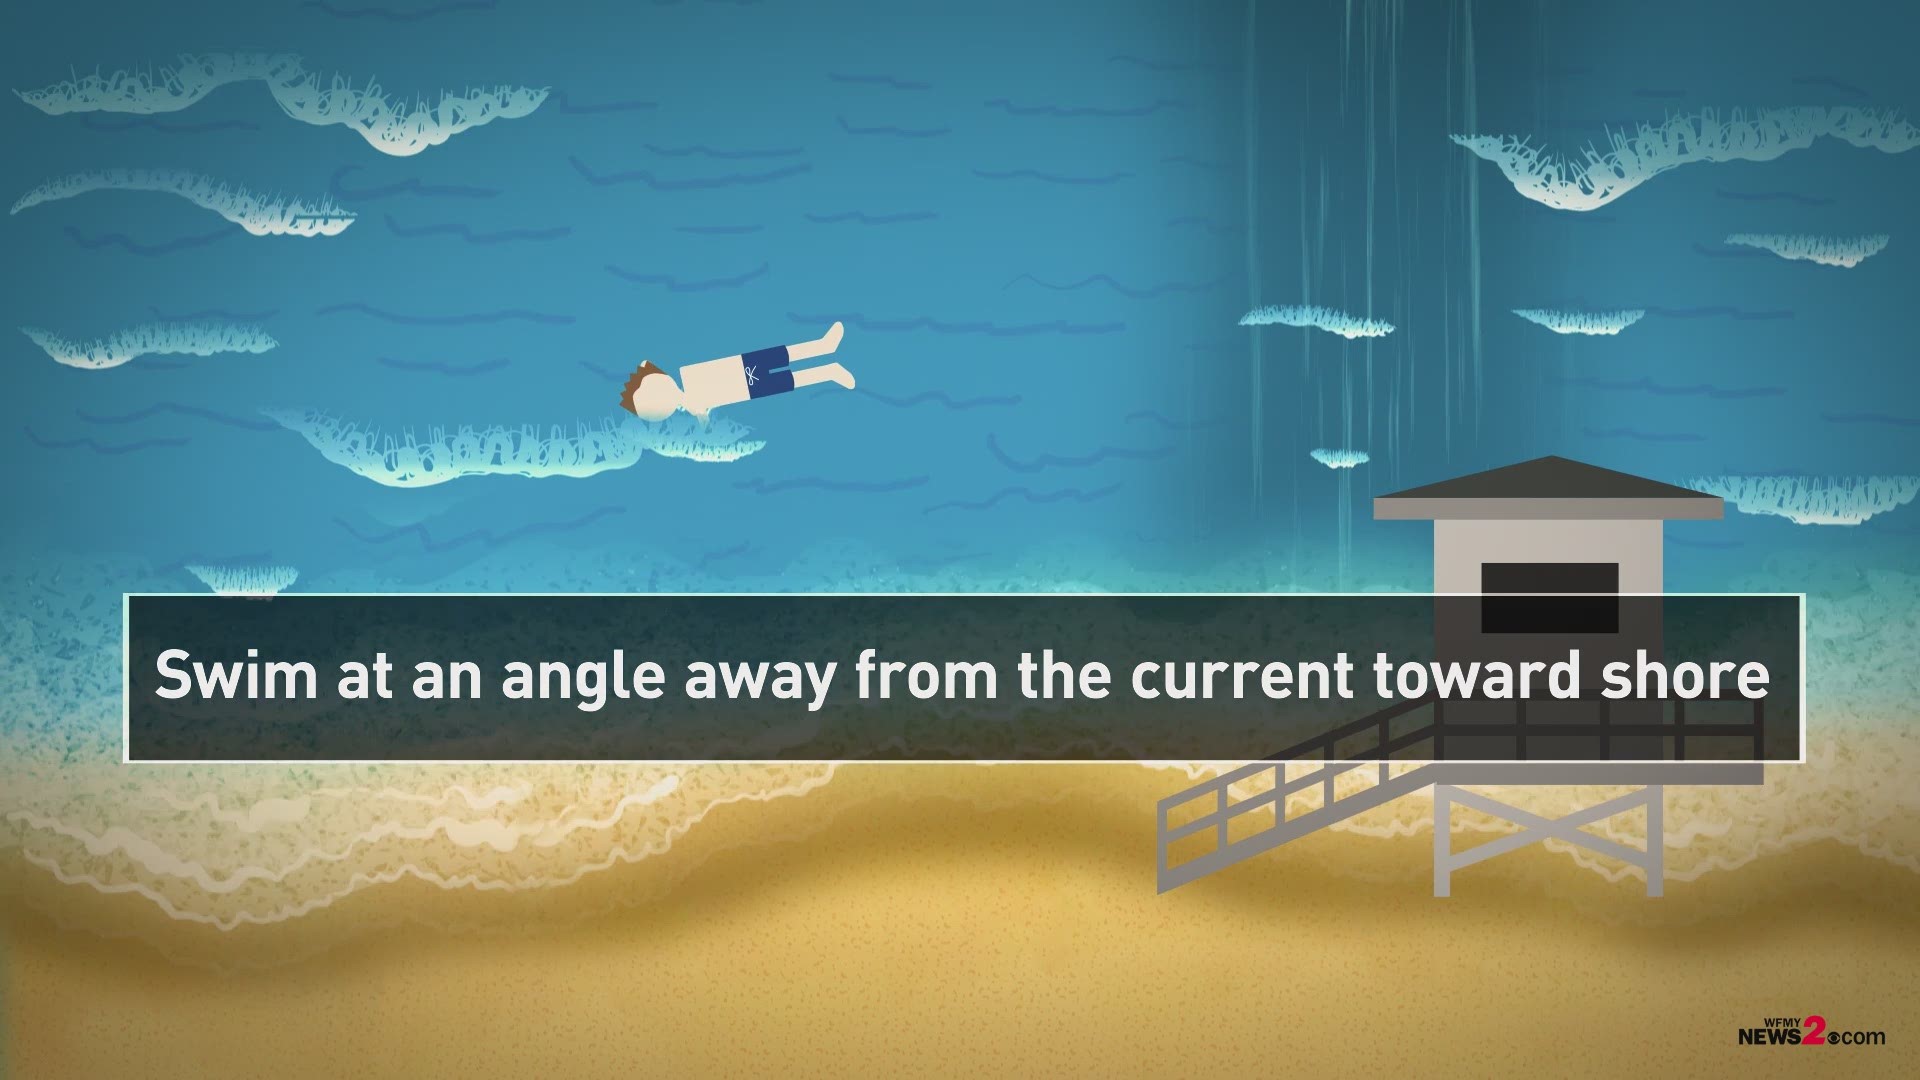 What You Need To Know About Rip Currents That Could Save Your Life